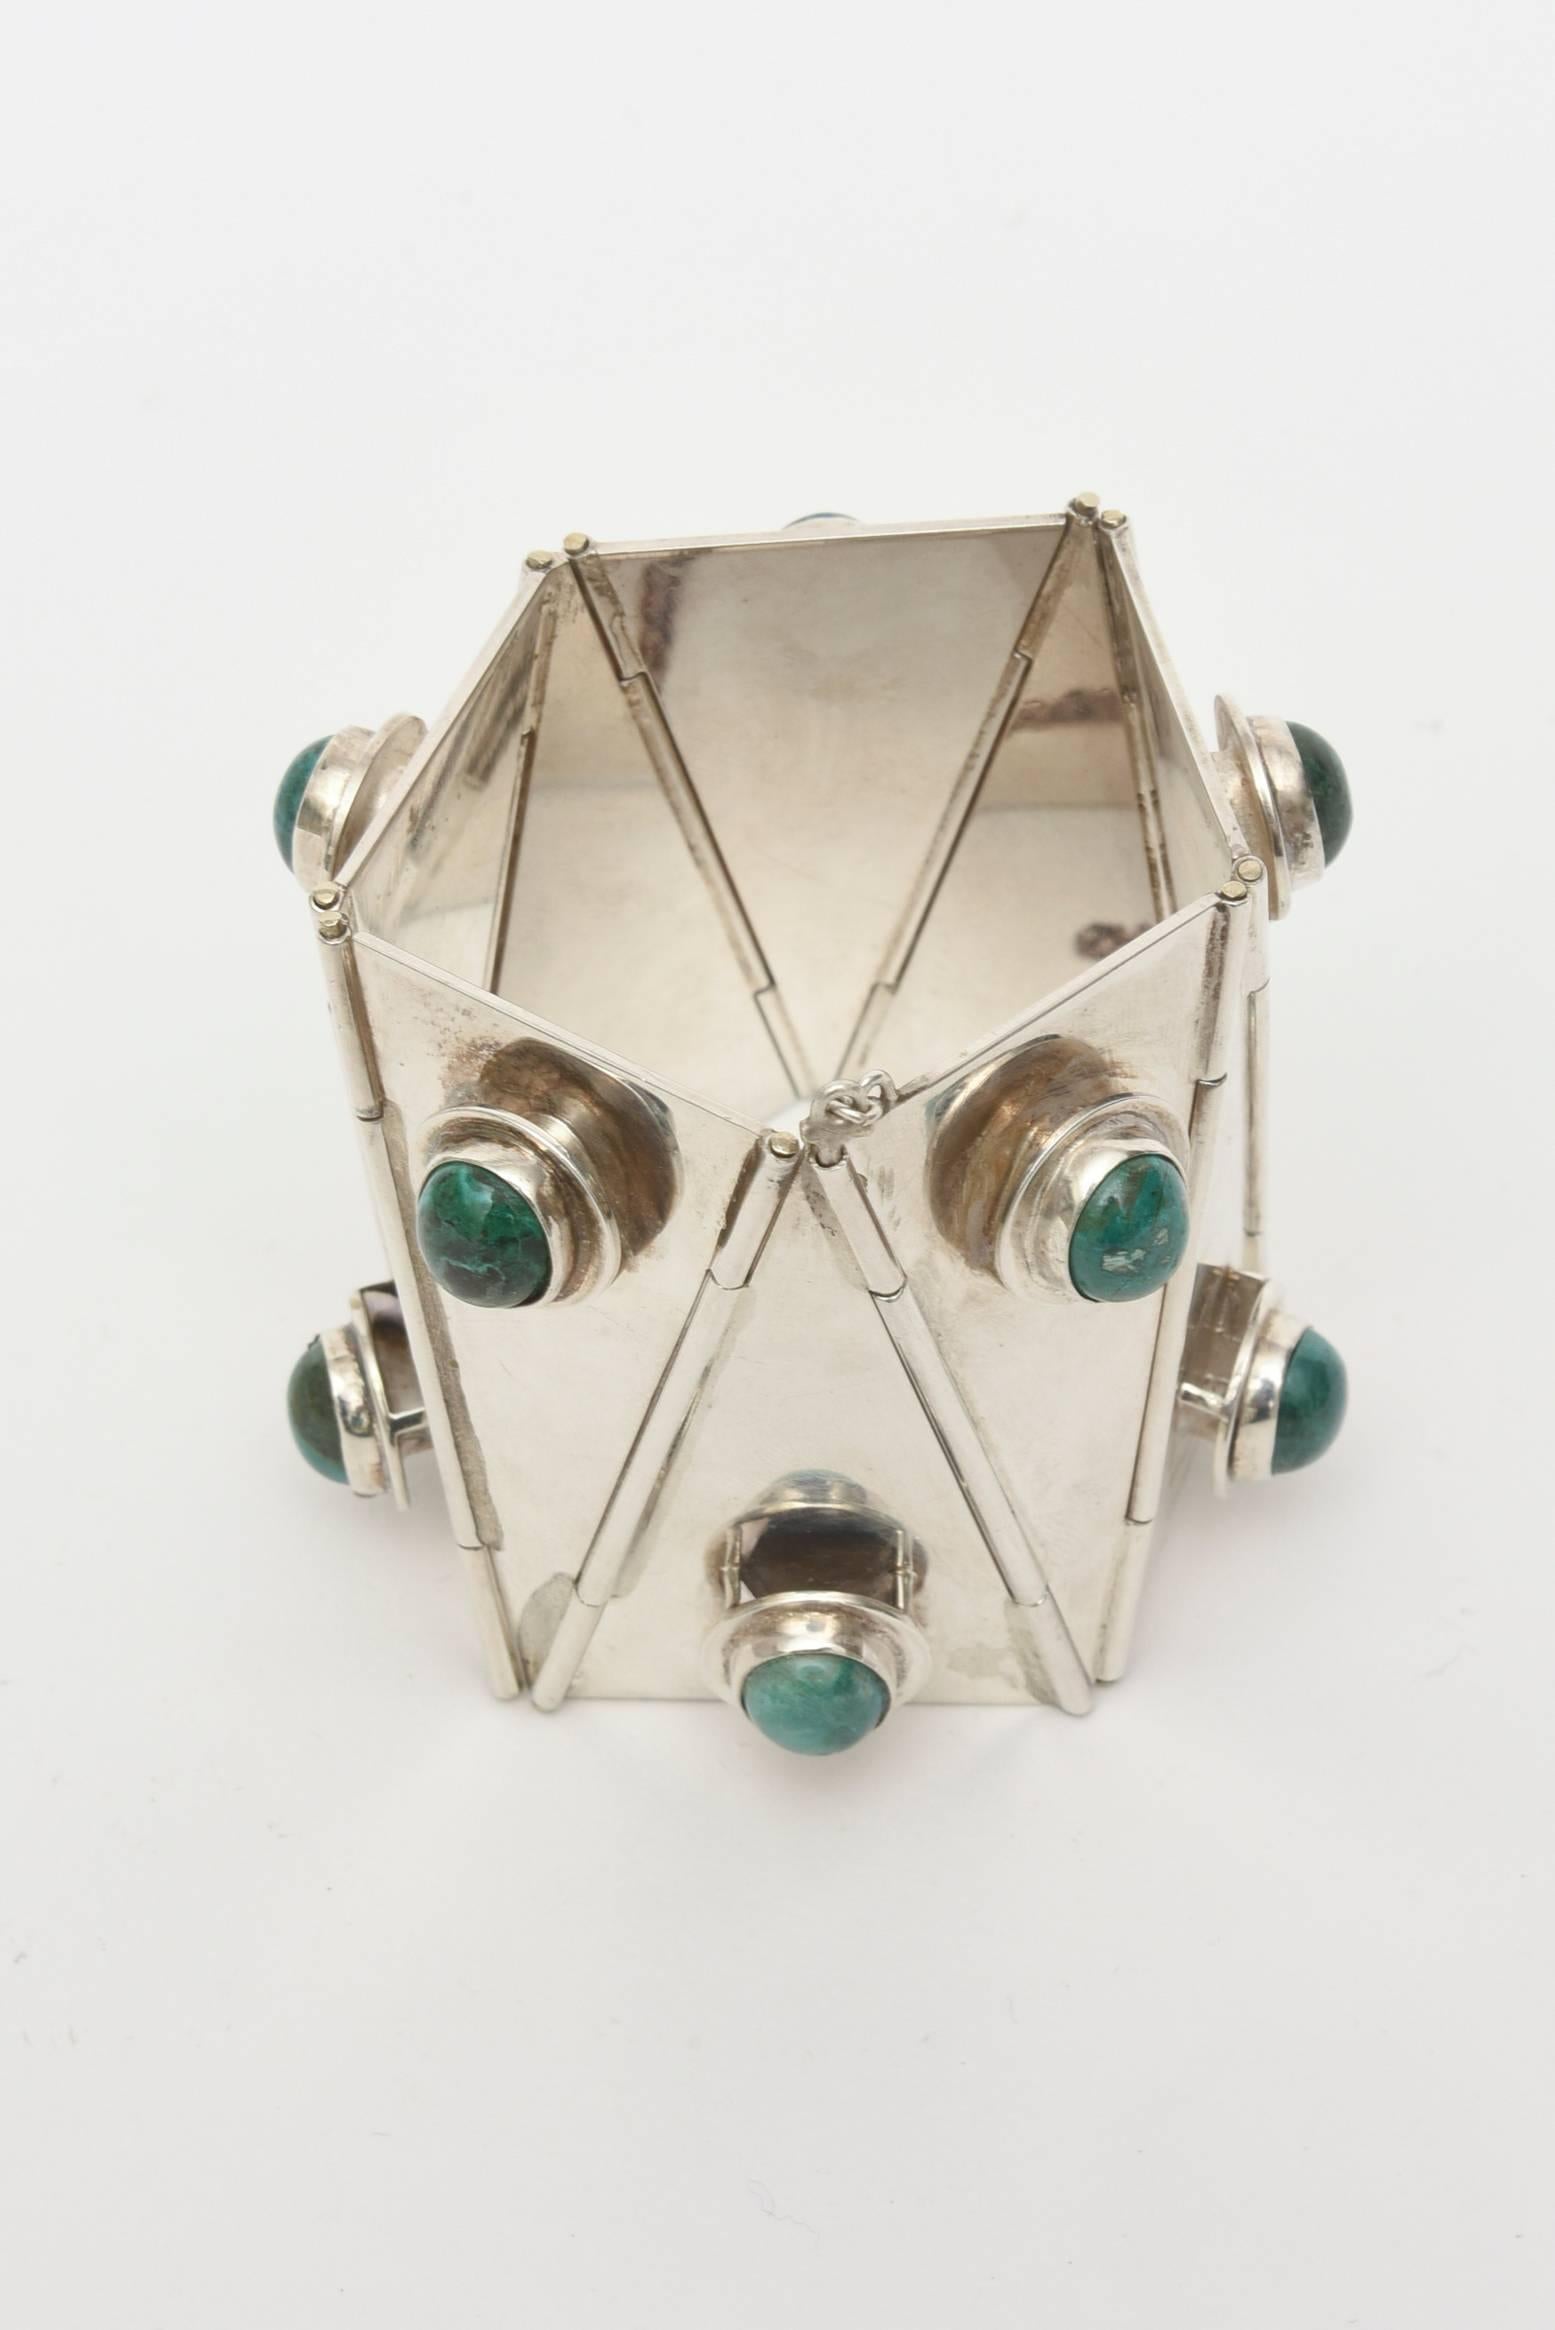 This amazing and spectacular studio made one of a kind vintage cuff bracelet of Sterling Silver & Malachite, is a 